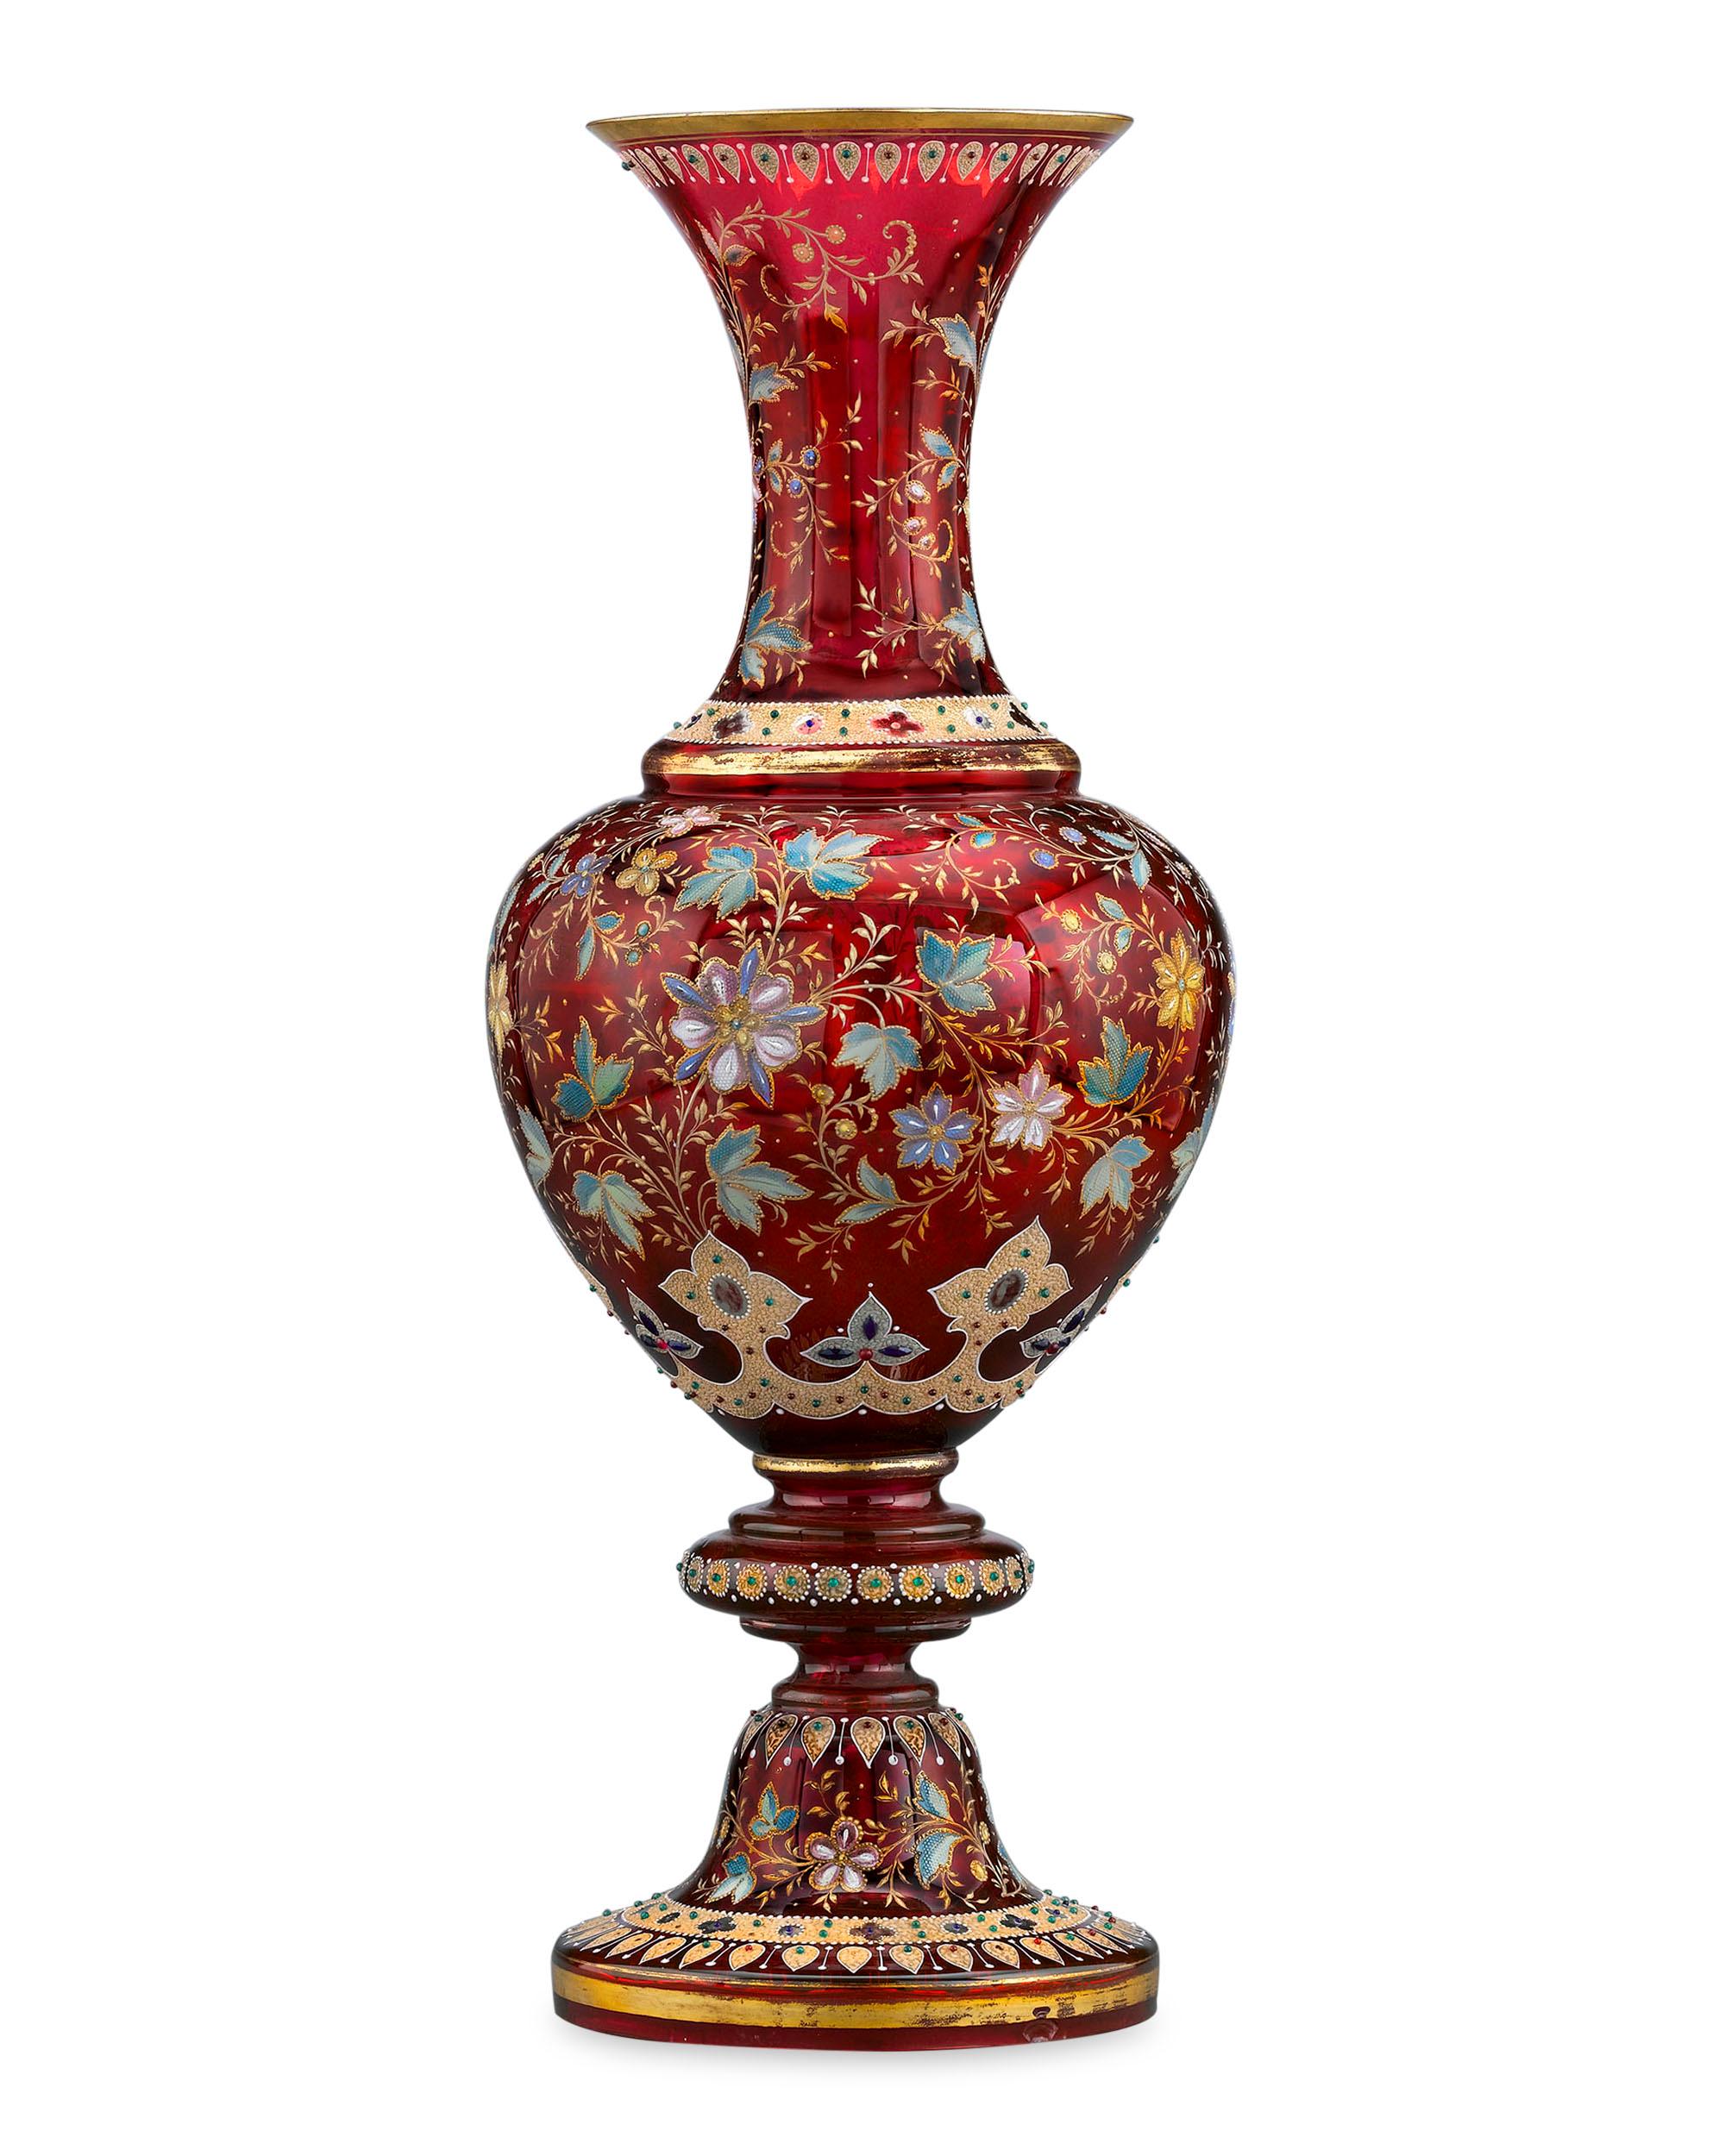 Almost certainly made as an exhibition piece, this monumental Moser ruby glass vase boasts a gilt-accented design of textured oak leaves and flowers, all enclosed by textured bands of jeweled gilding. Formed in a classical urn shape in Moser’s